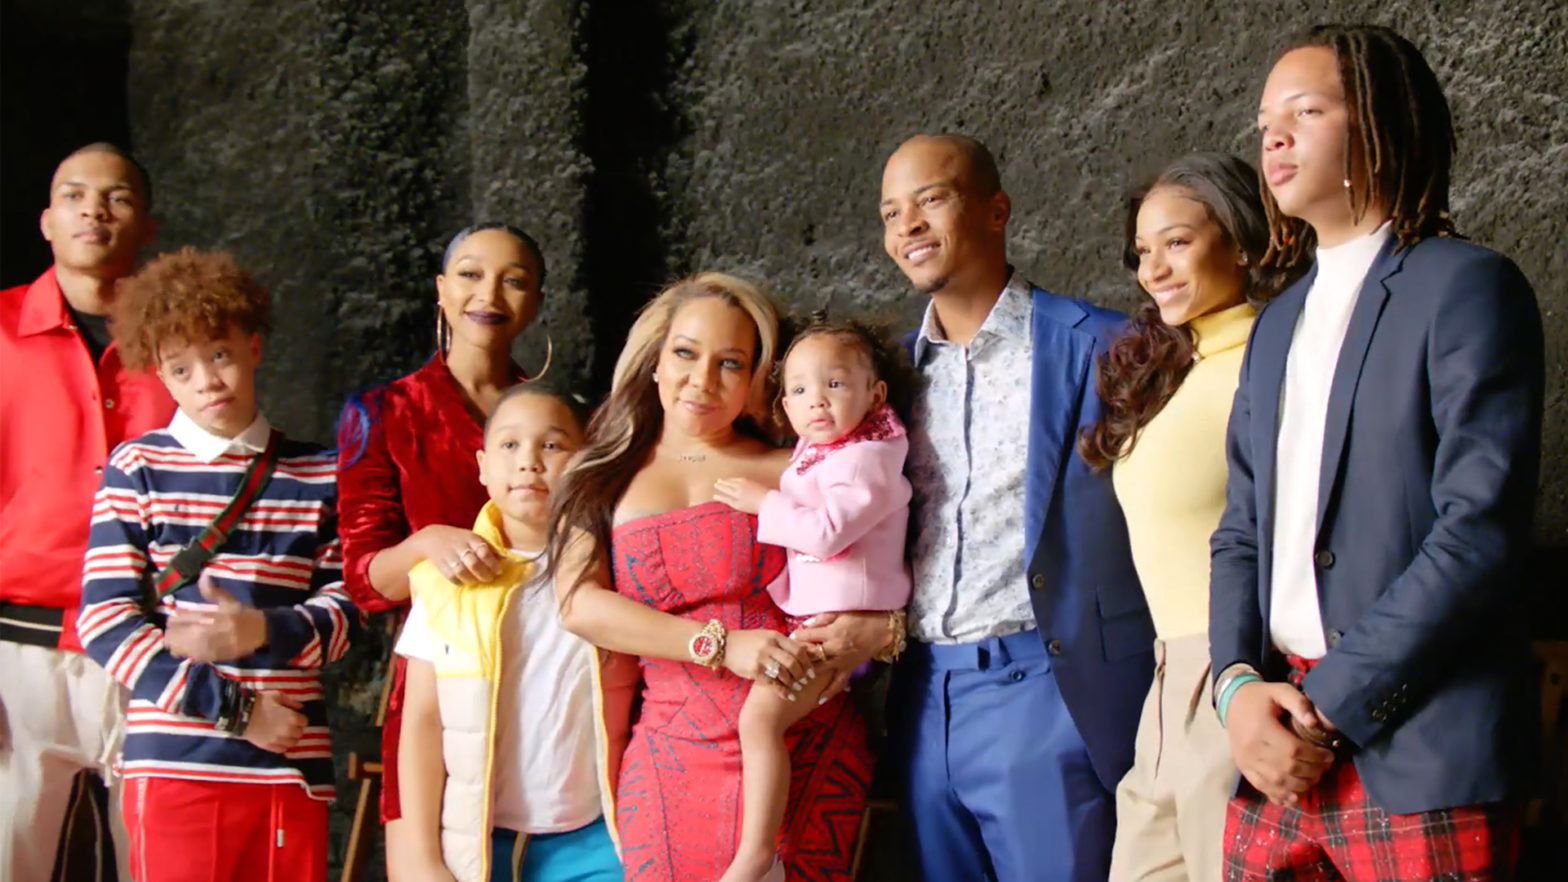 How T.I.'s $50M Net Worth Took His Family's Hustle To Another Level